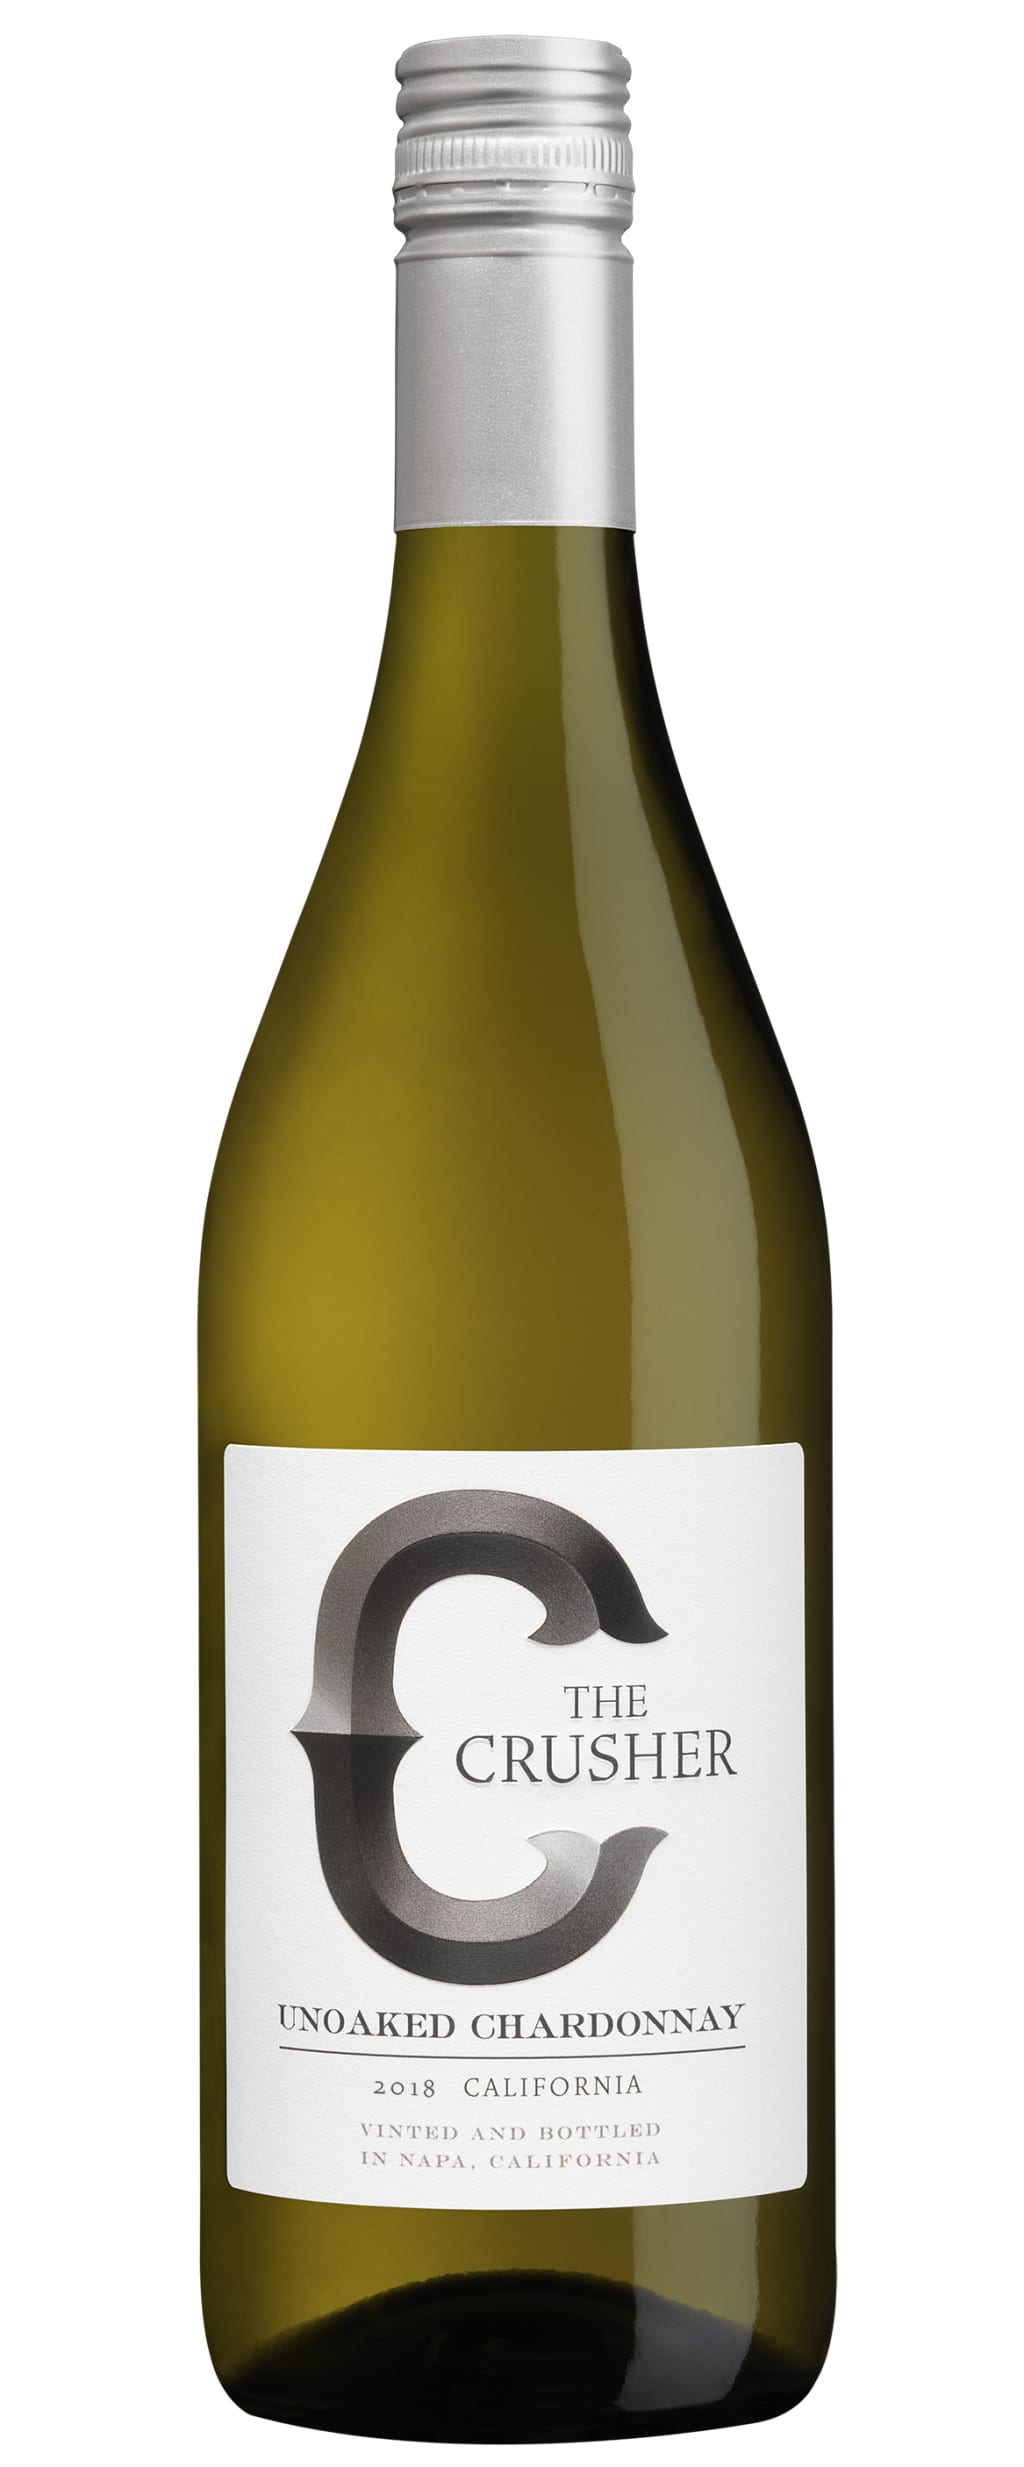 The Crusher Chardonnay Unoaked 2018